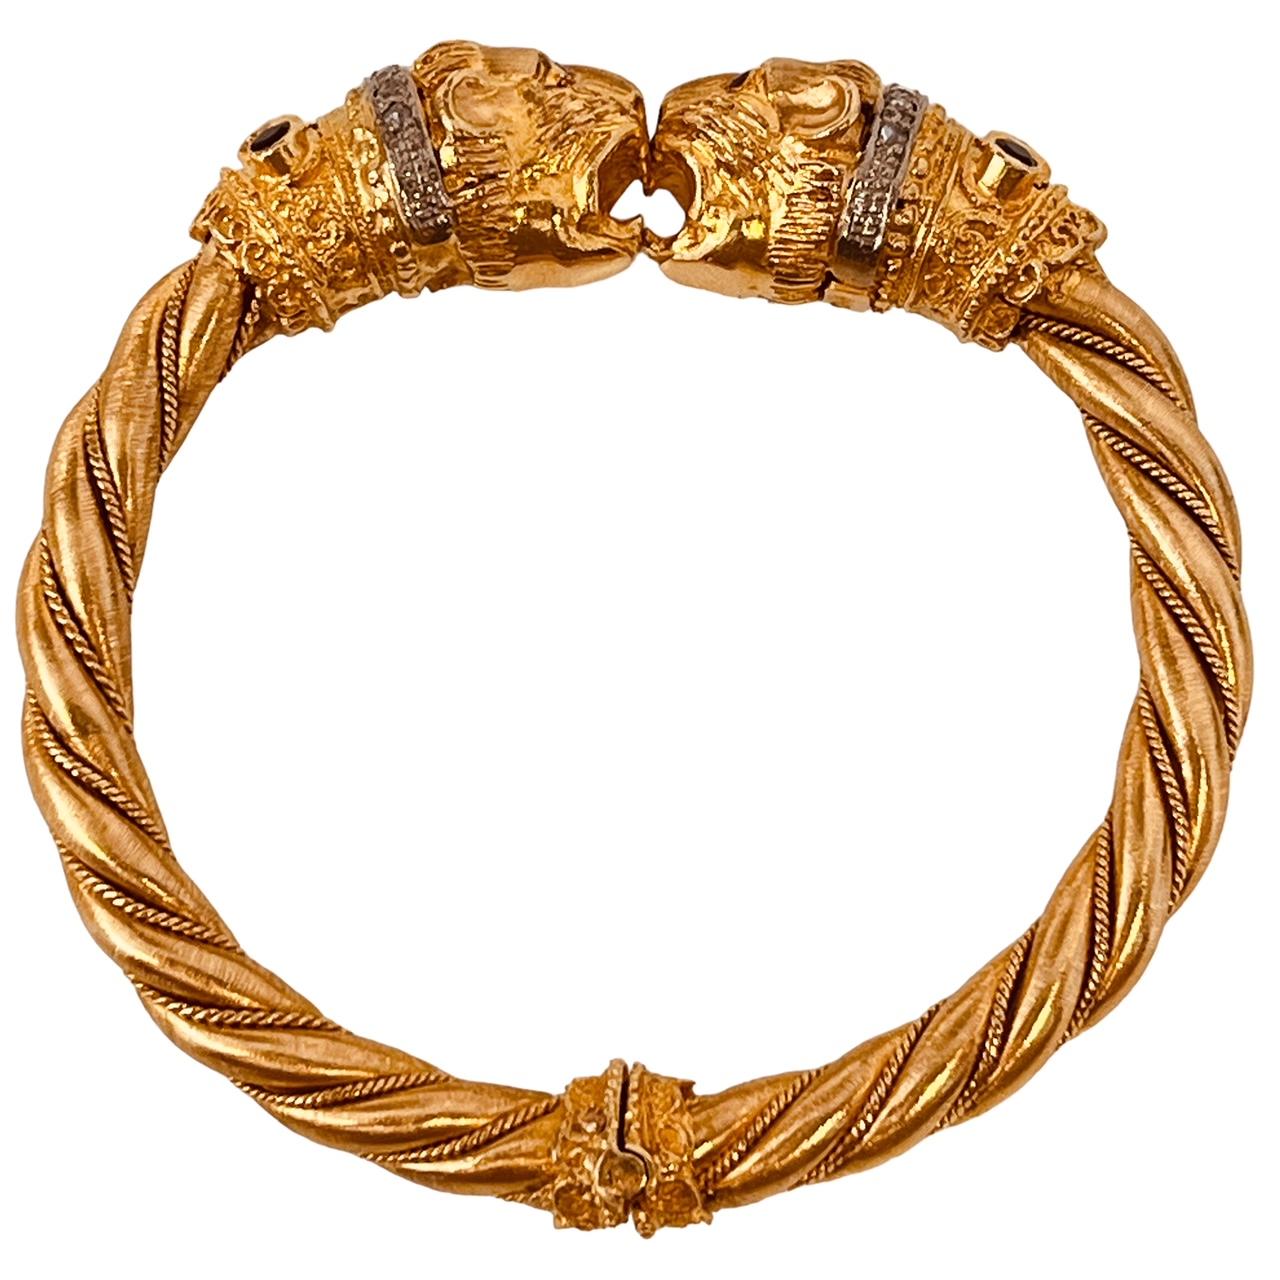 An 18ct yellow gold, twisted bangle with lion-head terminals. The collars set with diamonds, sapphires and emeralds and with ruby eyes. Circa 1969/70. 63.7 grams. Inner diameter approximately 5.5cm. With maker's mark and 